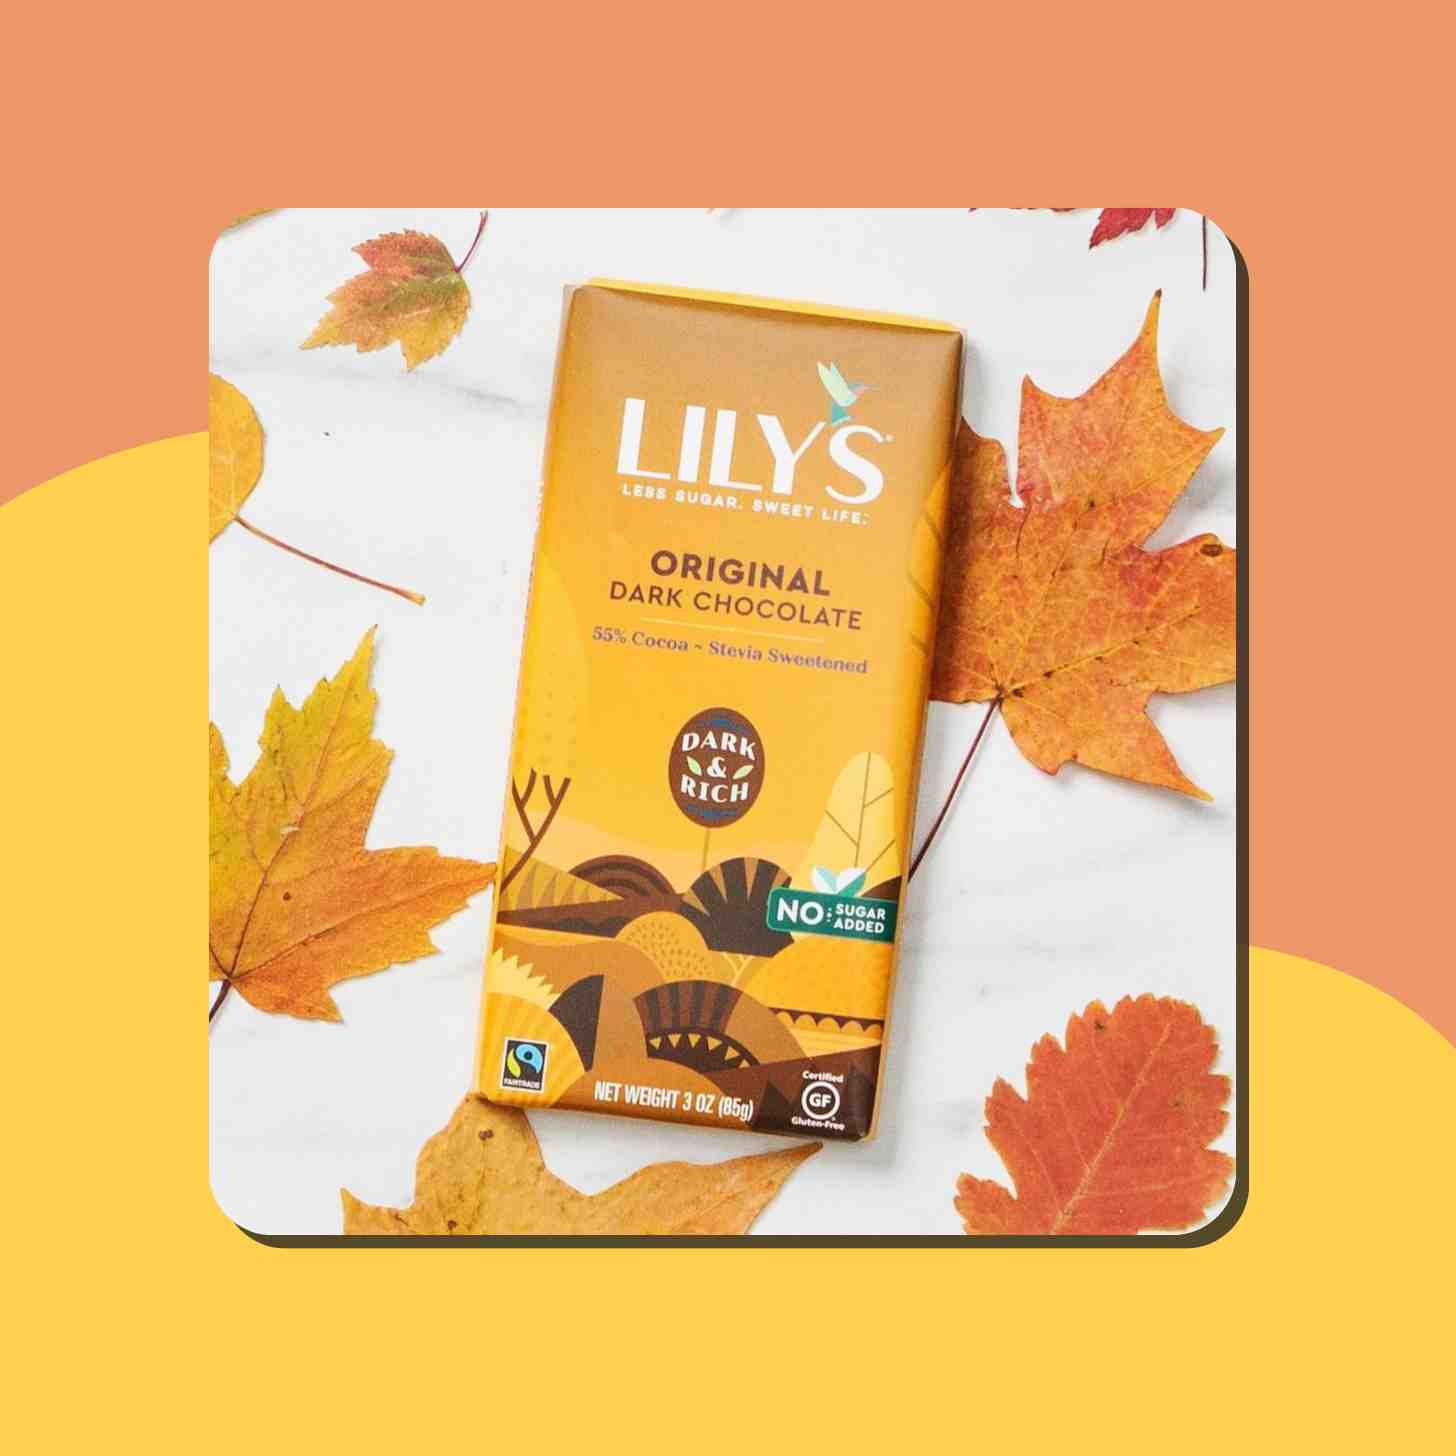 A Box Of Lily's Original Dark Chocolate Sorrounded by Maple Leaves 